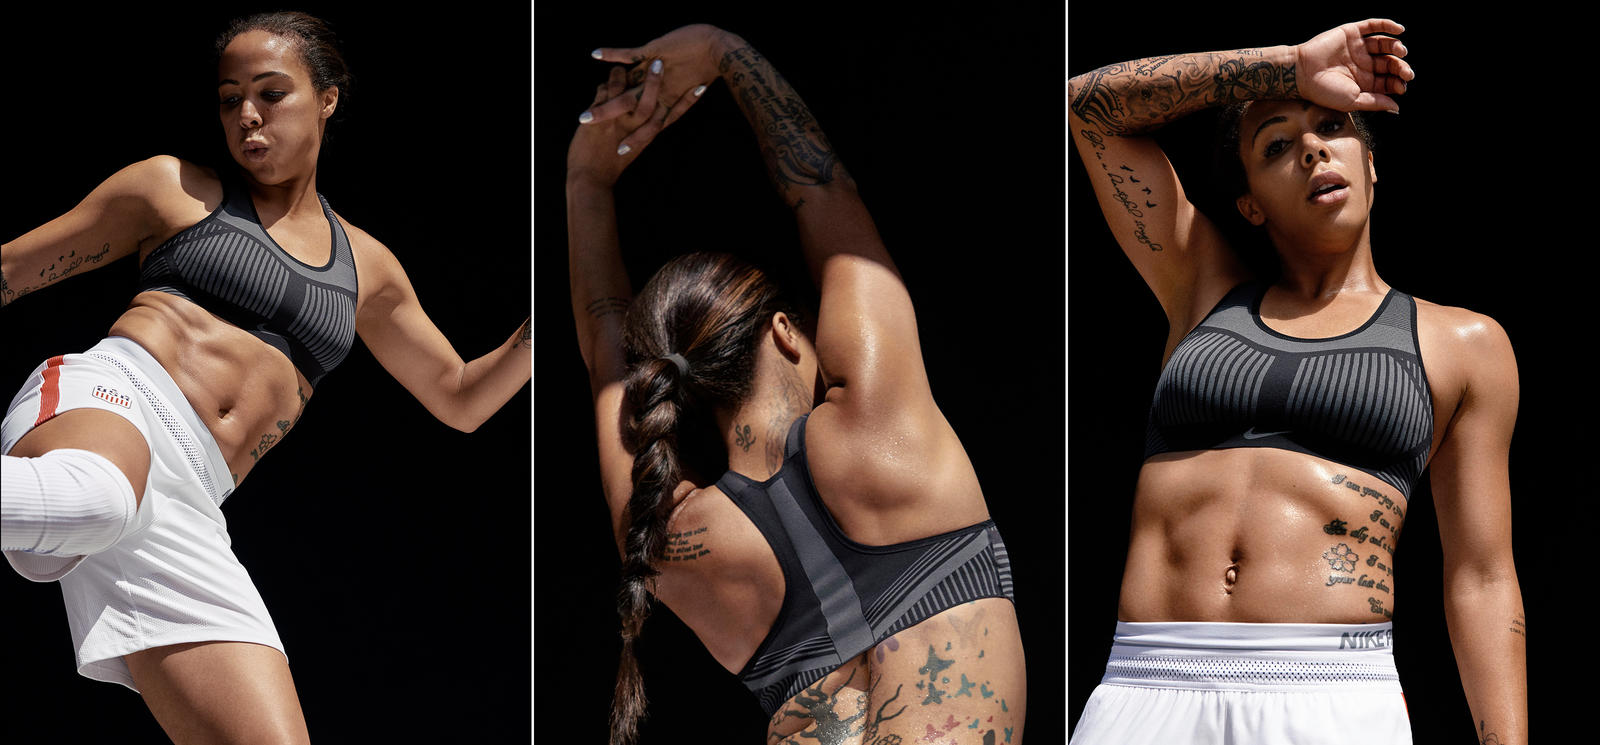 Soccer player and Olympic gold medalist Sydney Leroux works out in the Nike FE/NOM Flyknit Bra that combines high-support performance with unmatched comfort. © Nike 